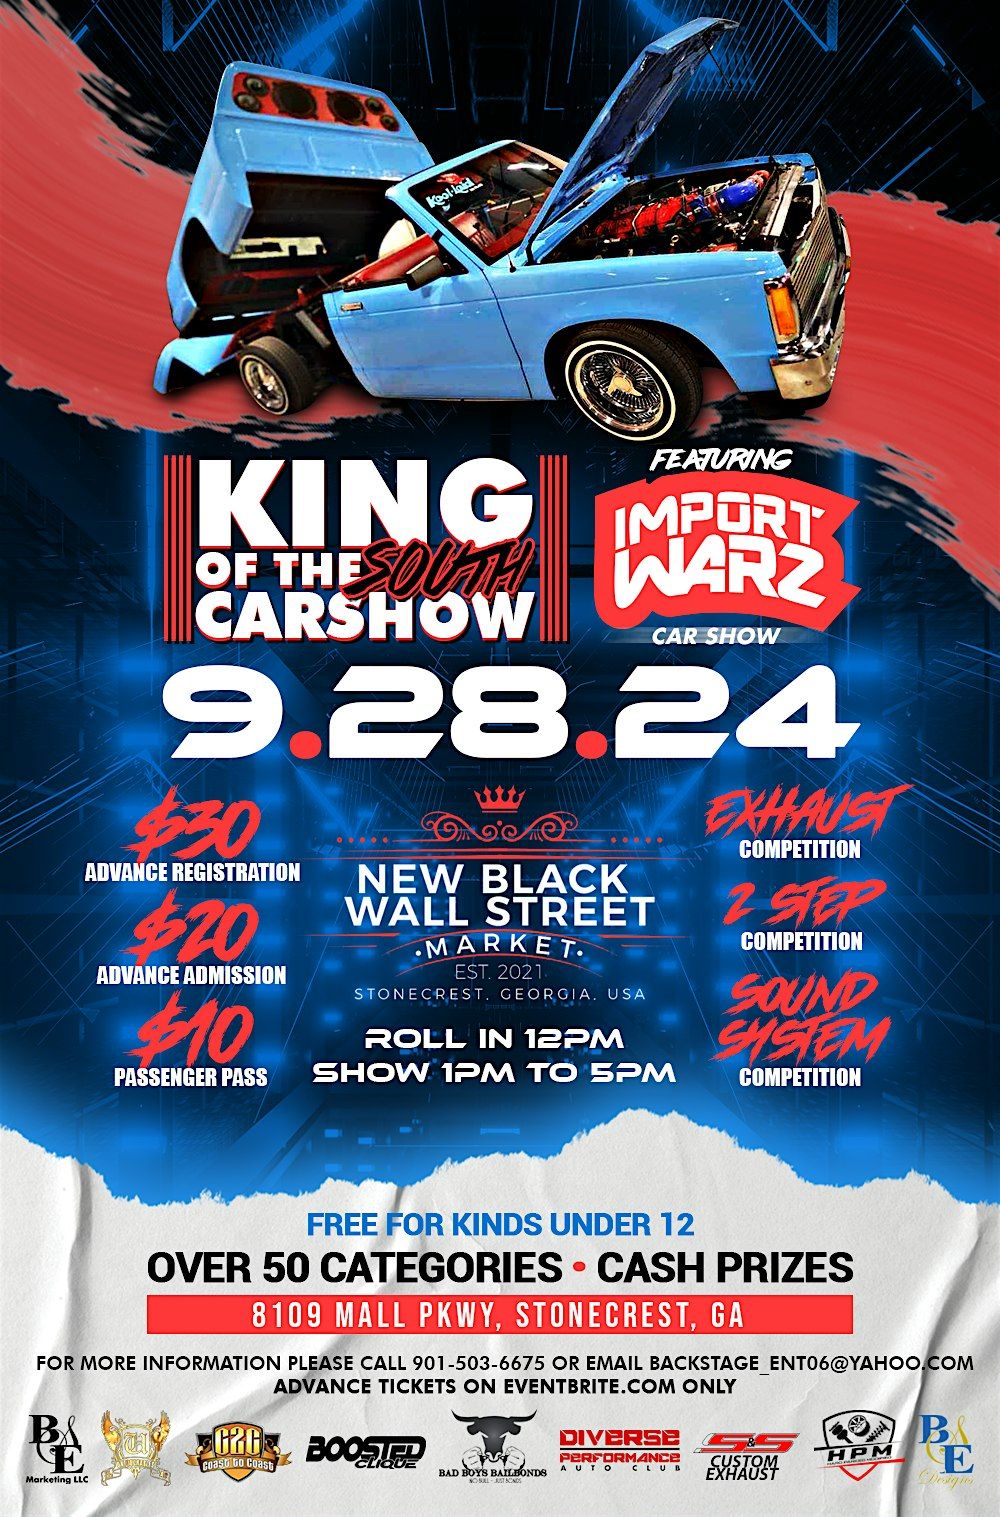 KING OF THE SOUTH FEATURING IMPORT WARZ TOUR 12 STONECREST,GA